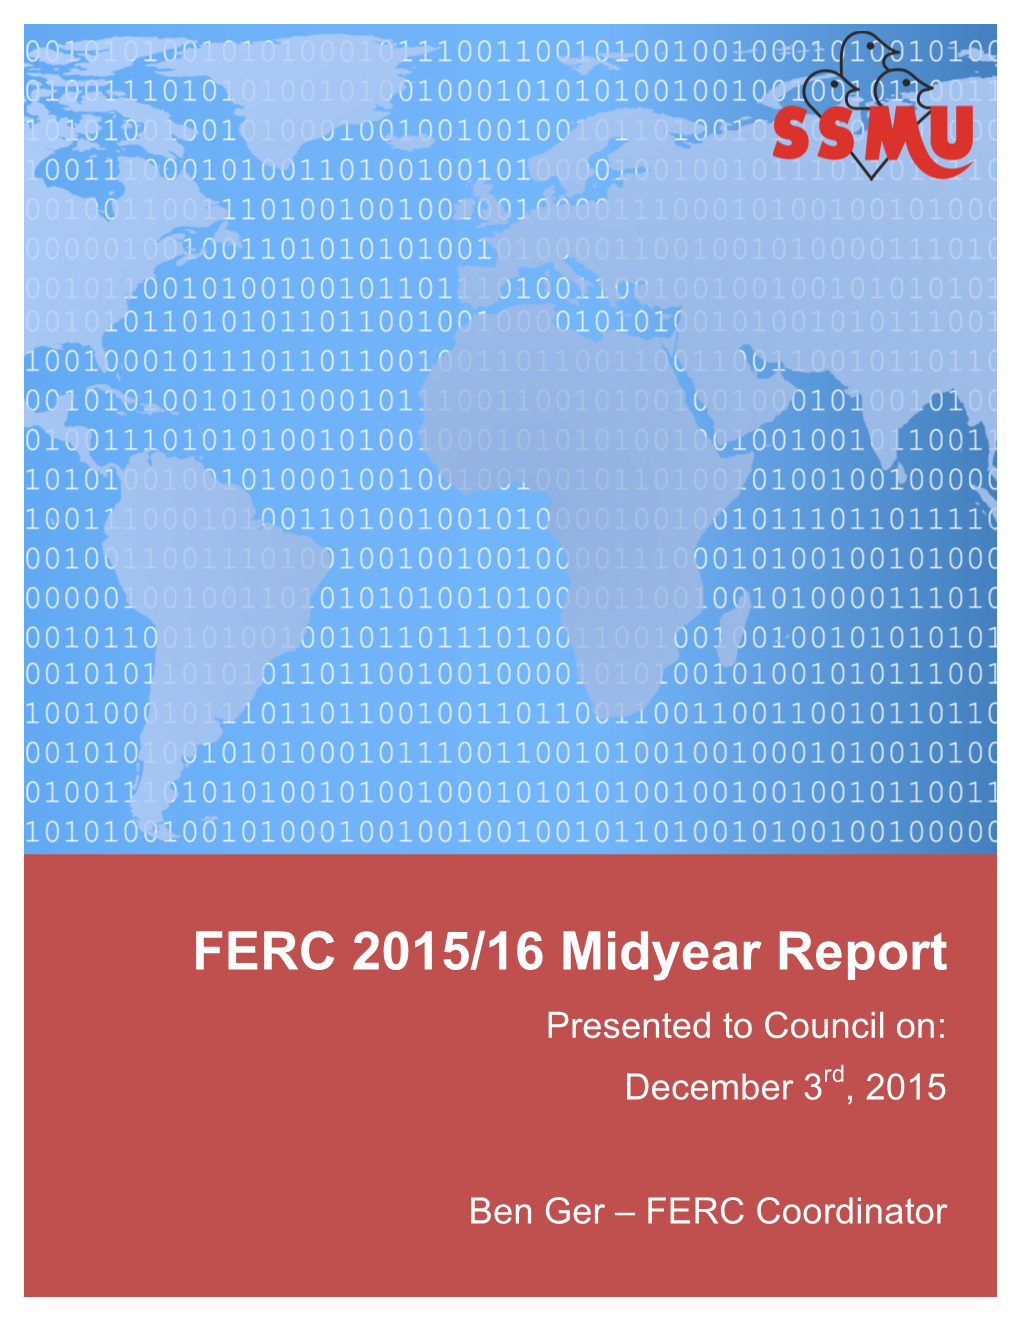 FERC 2015/16 Midyear Report Presented to Council On: December 3Rd, 2015